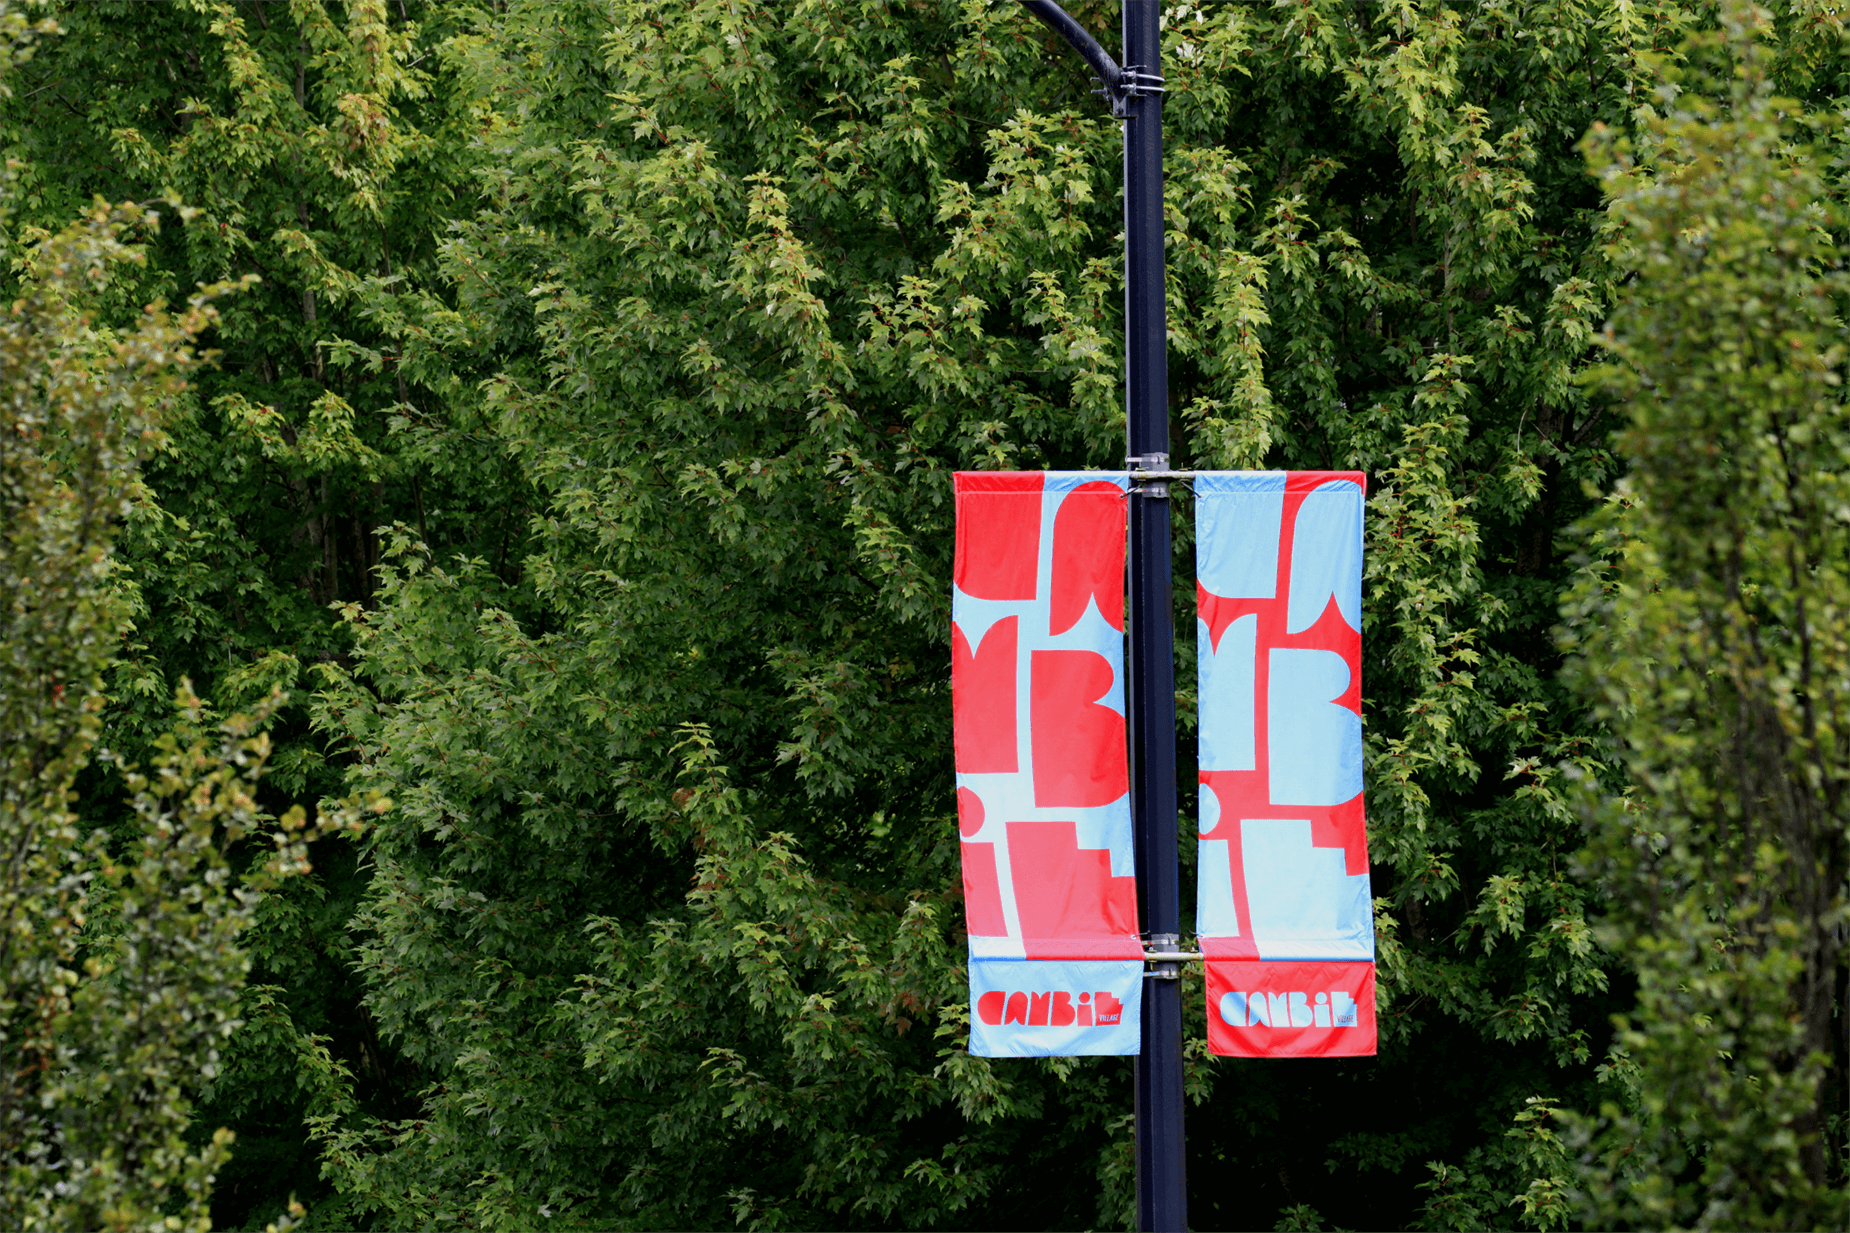 cambie village brand identity and street banners